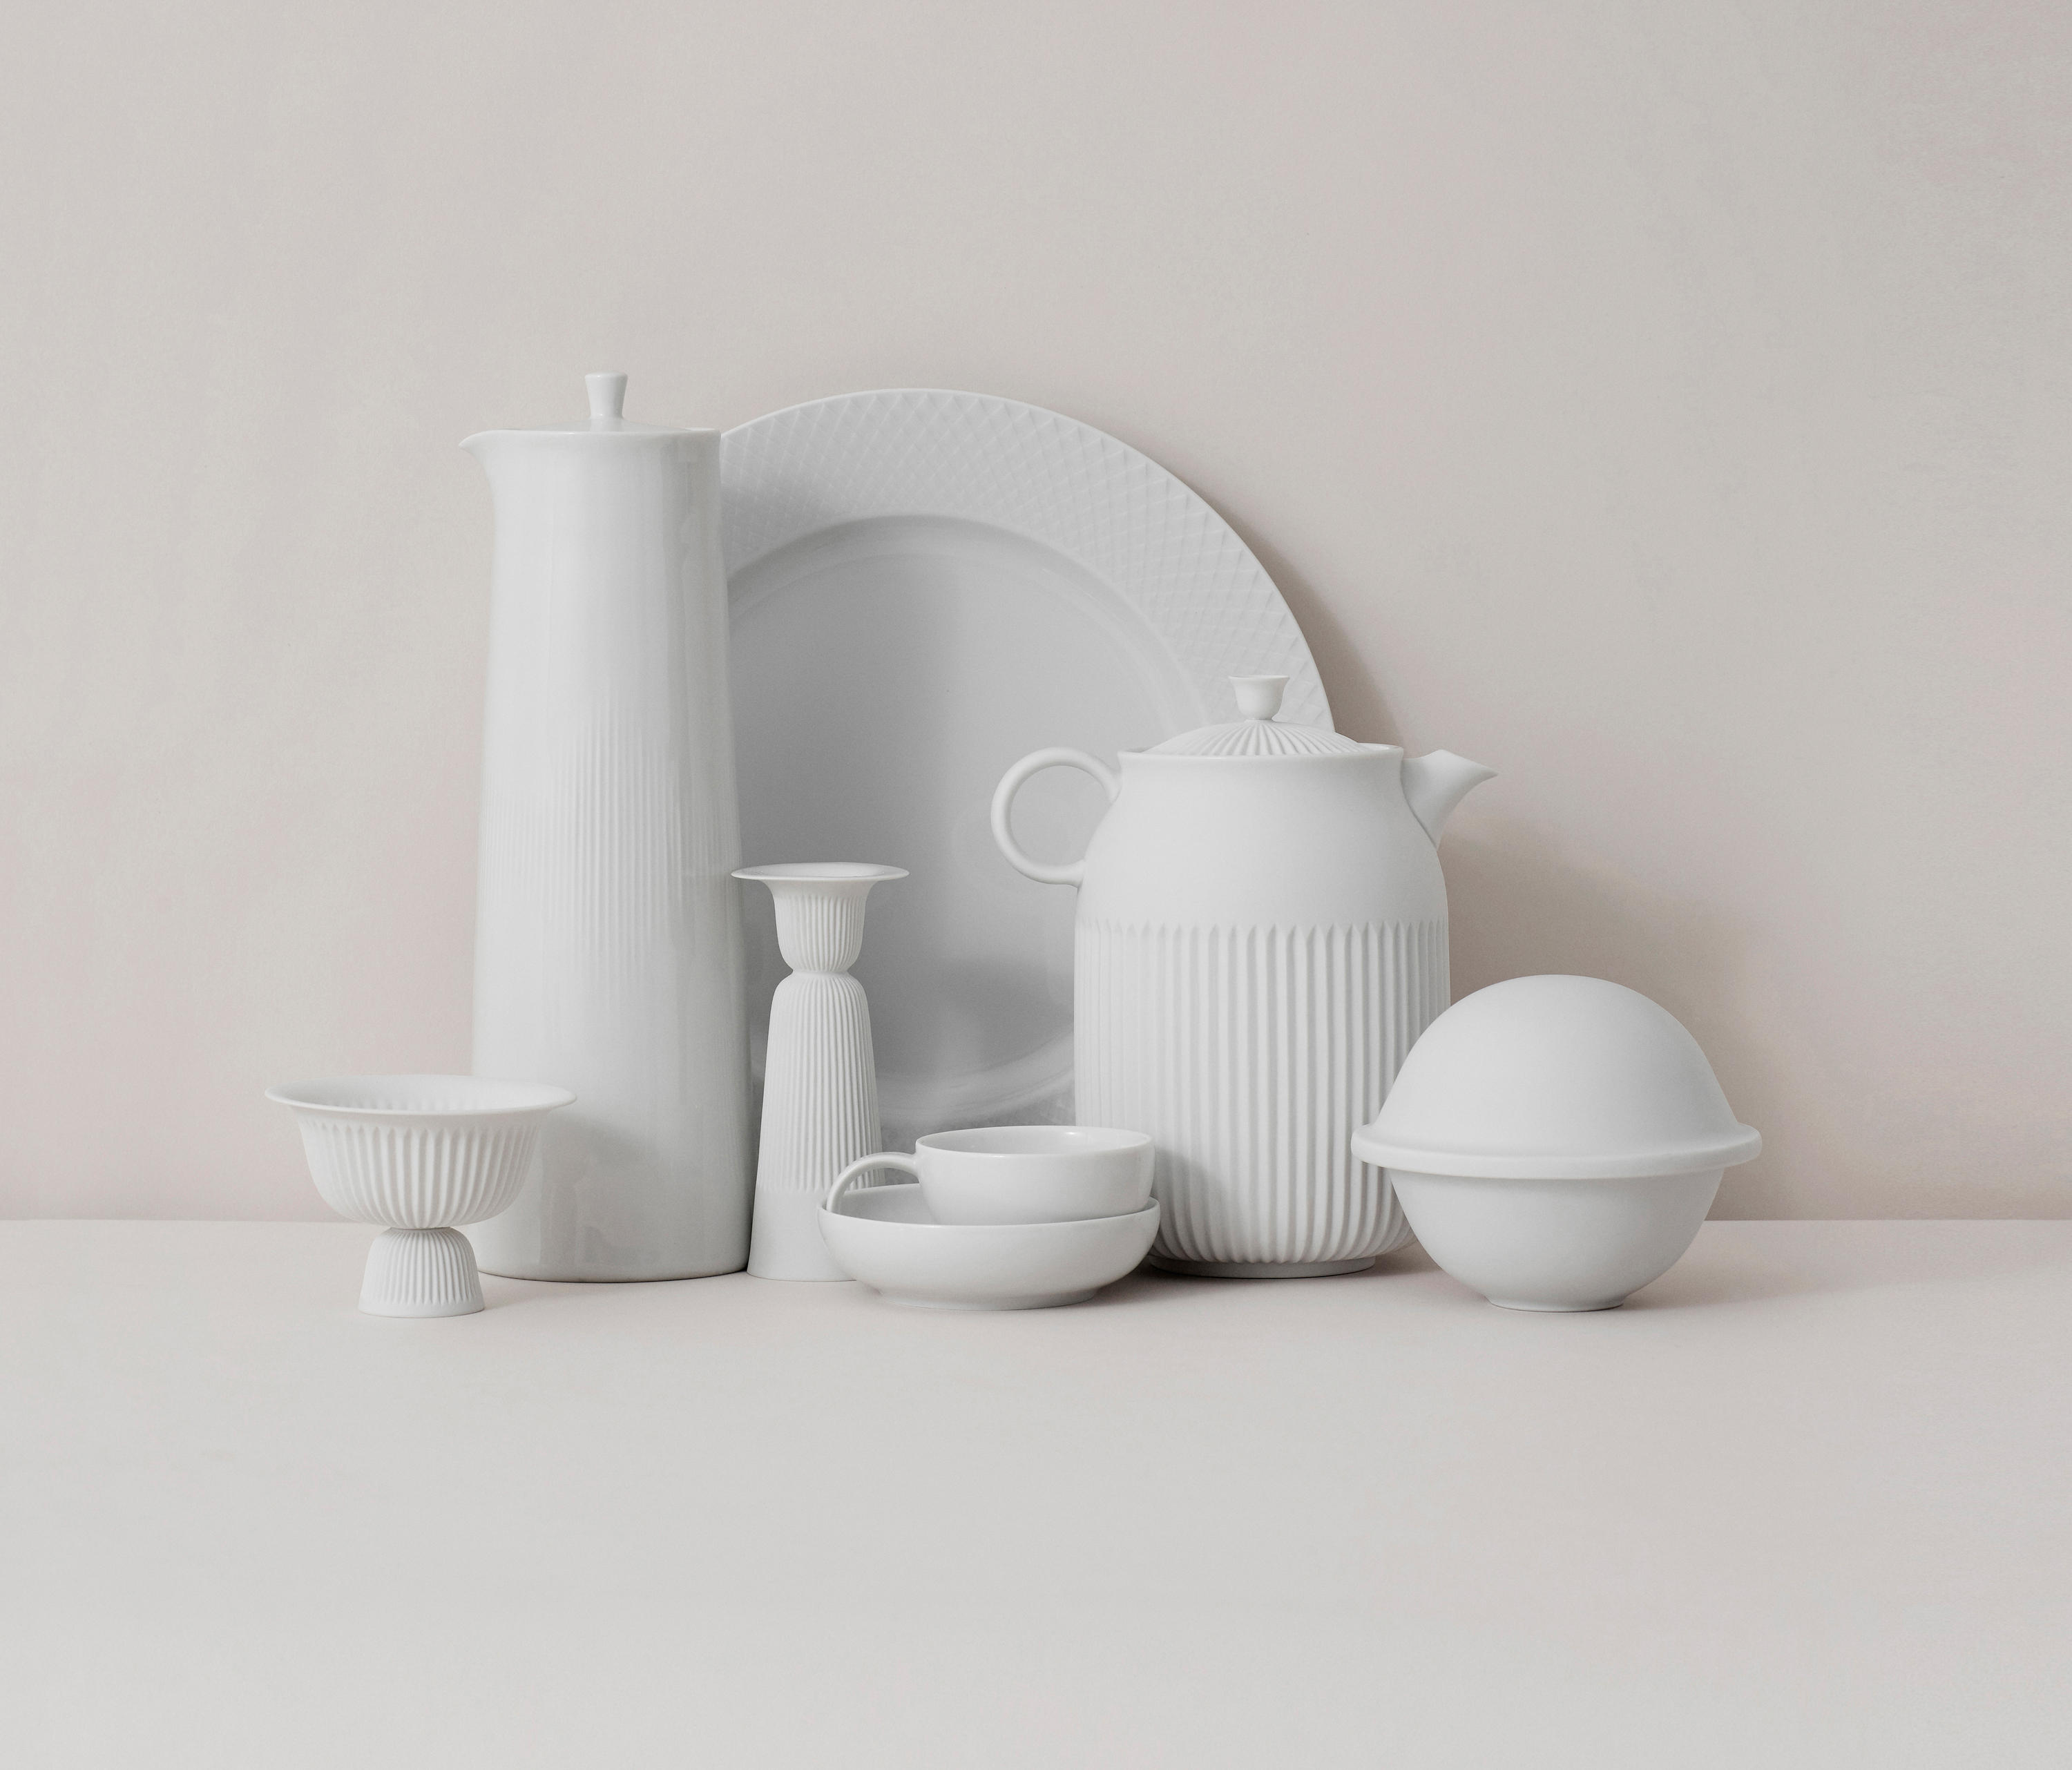 Retfærdighed berømt Tid Cups Large - High quality designer products | Architonic